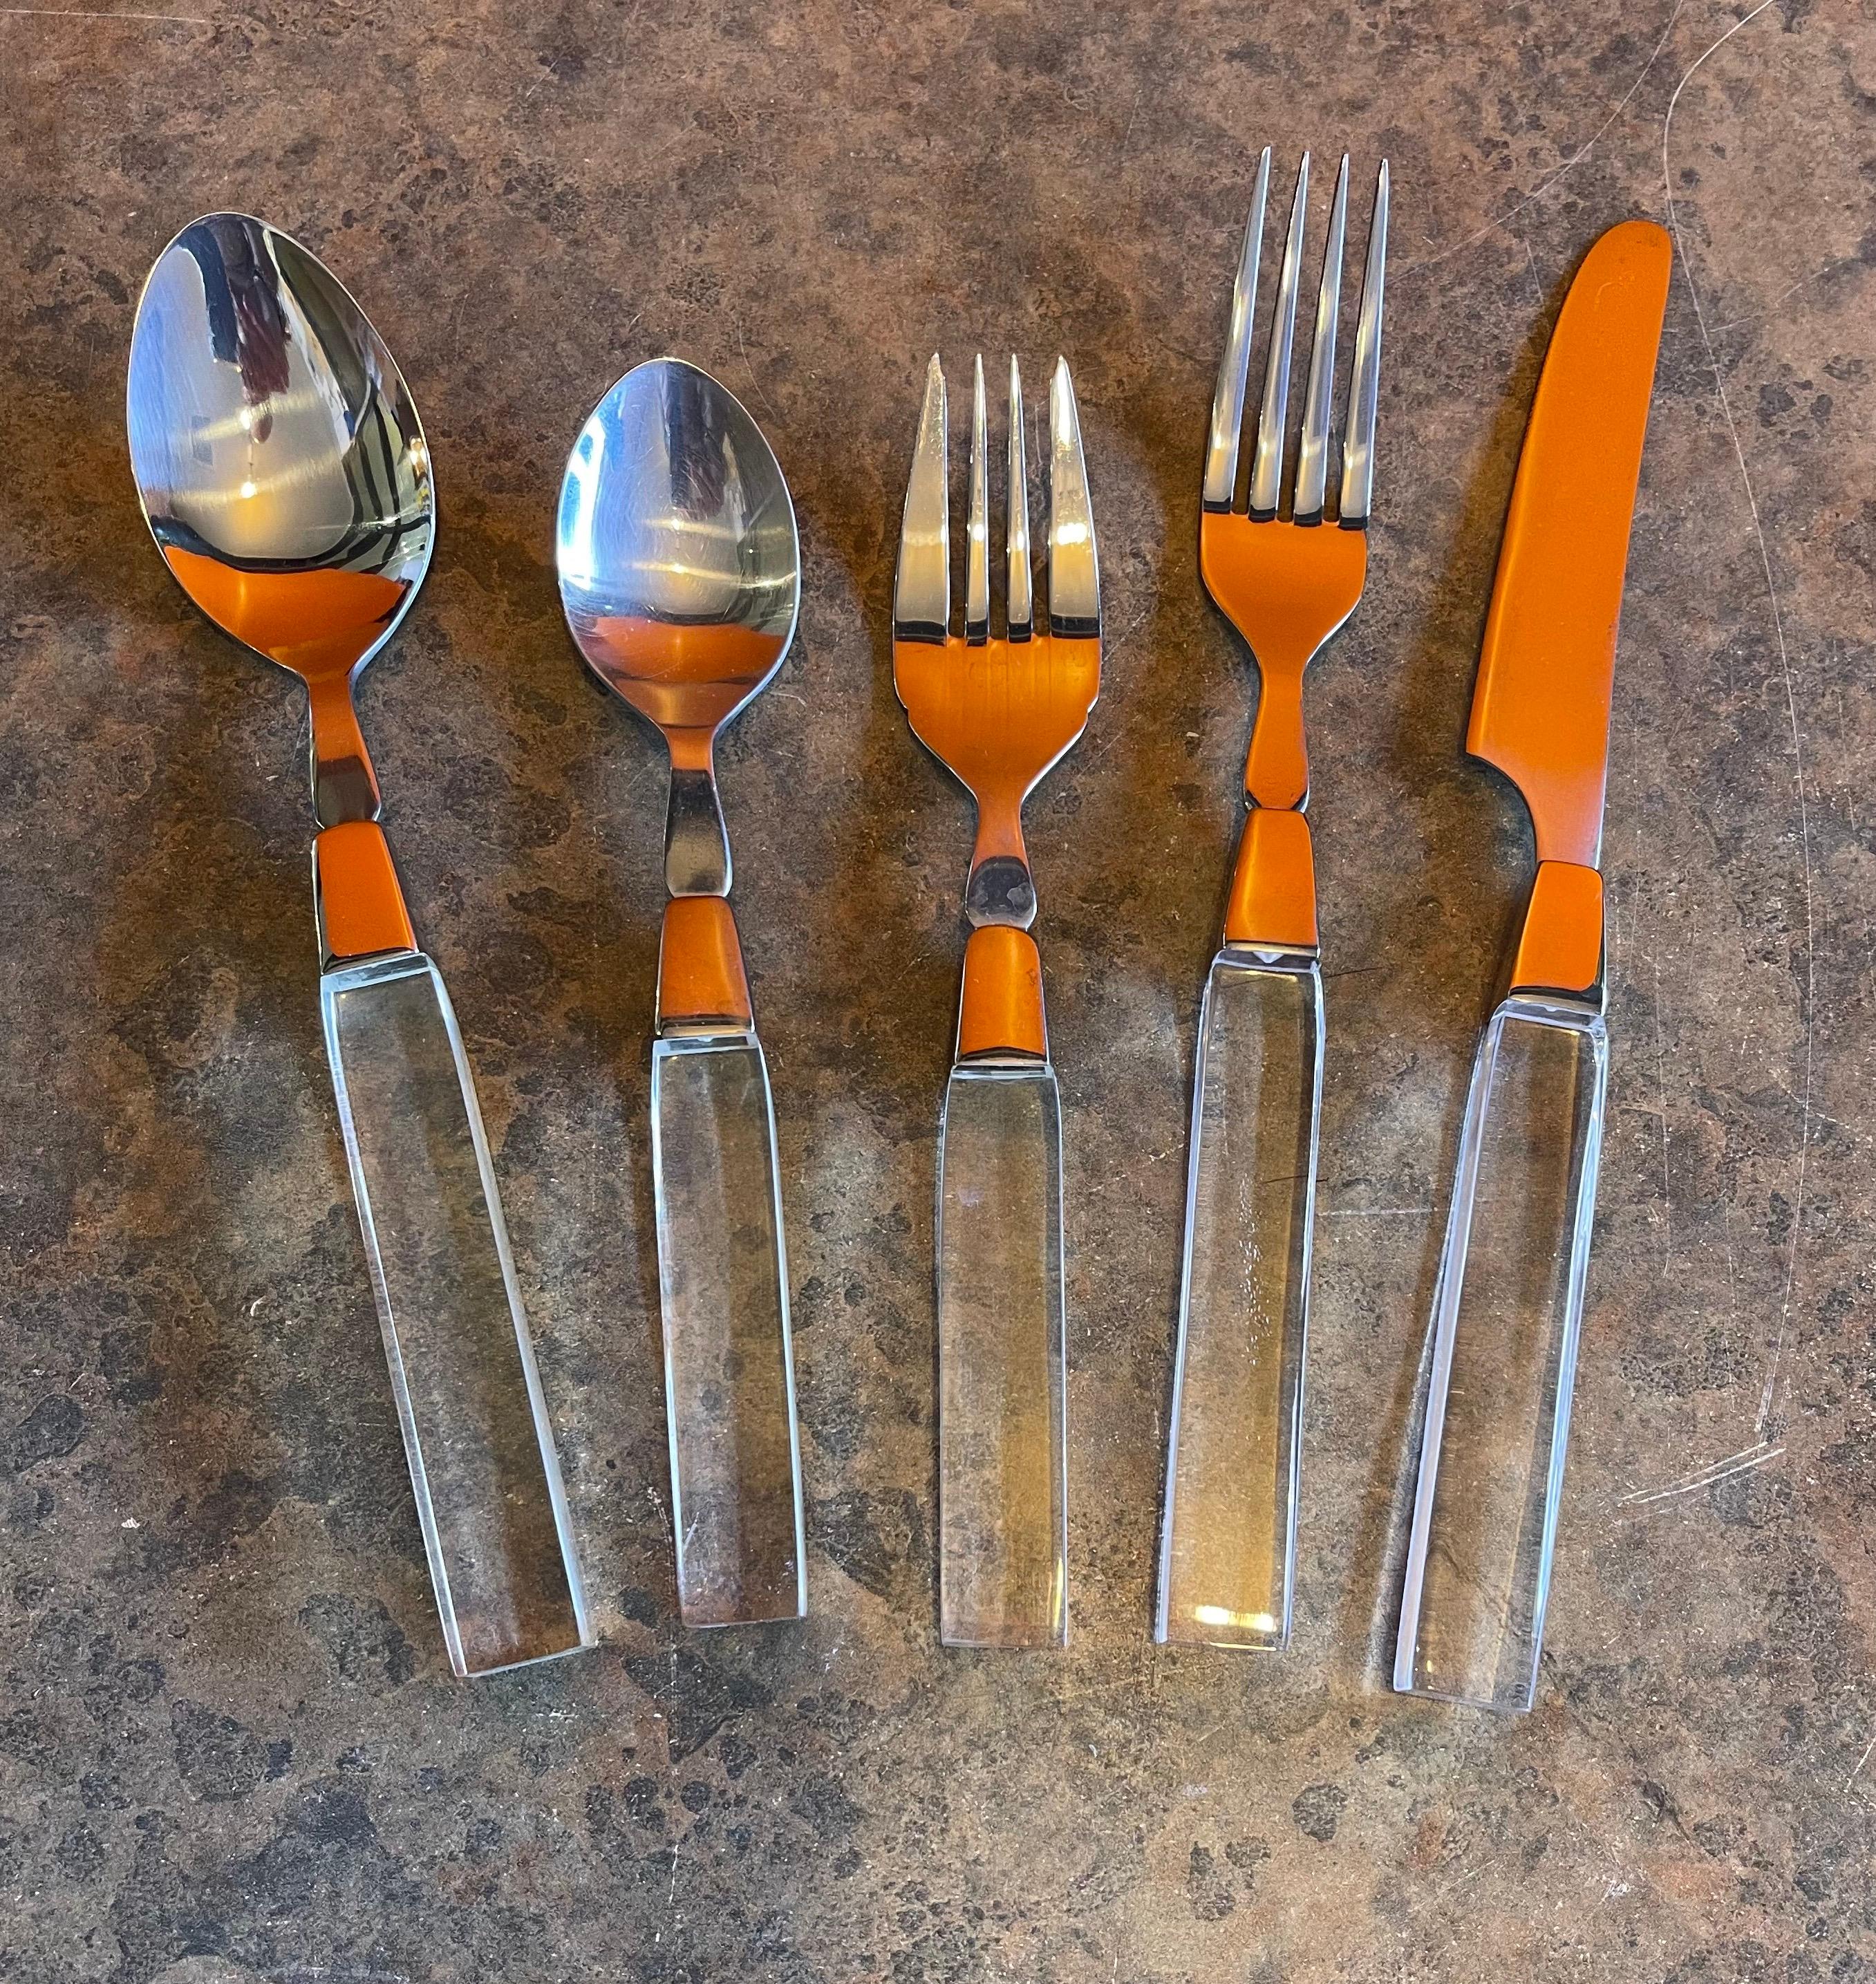 Modern stainless steel & lucite flatware set for eight (43 pieces total) by Rialto Lifetime Cutlery circa, 1980s. The set includes eight forks, salad forks, tea spoons, table spoons and knives as well as a butter knife and two small serving spoons.